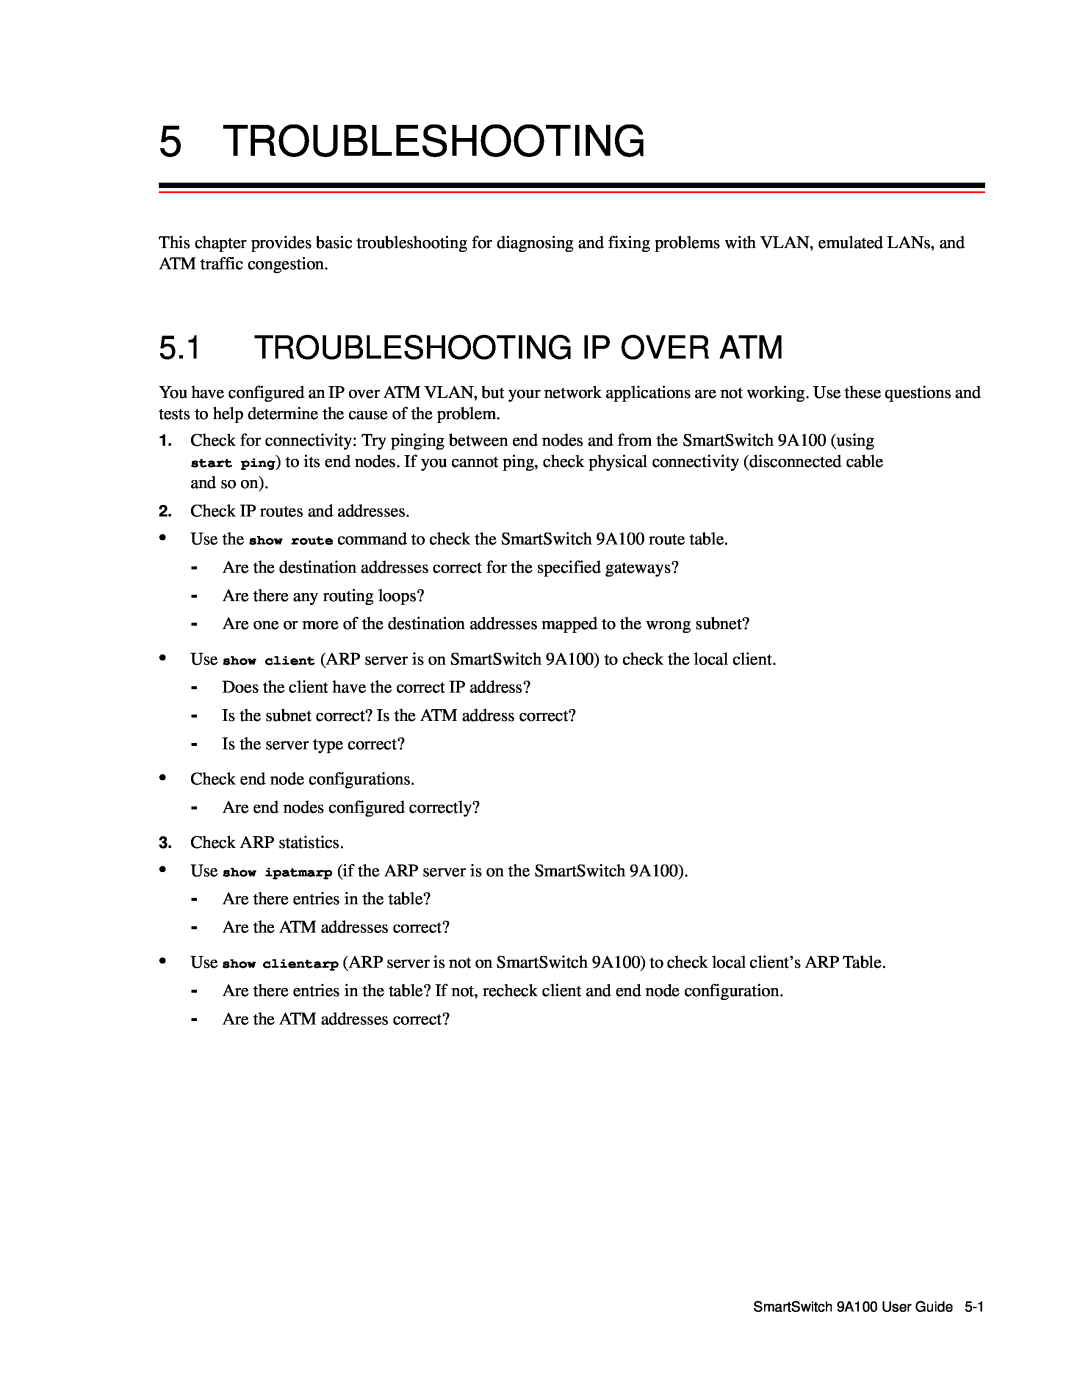 Cabletron Systems 9A100 manual Troubleshooting Ip Over Atm 